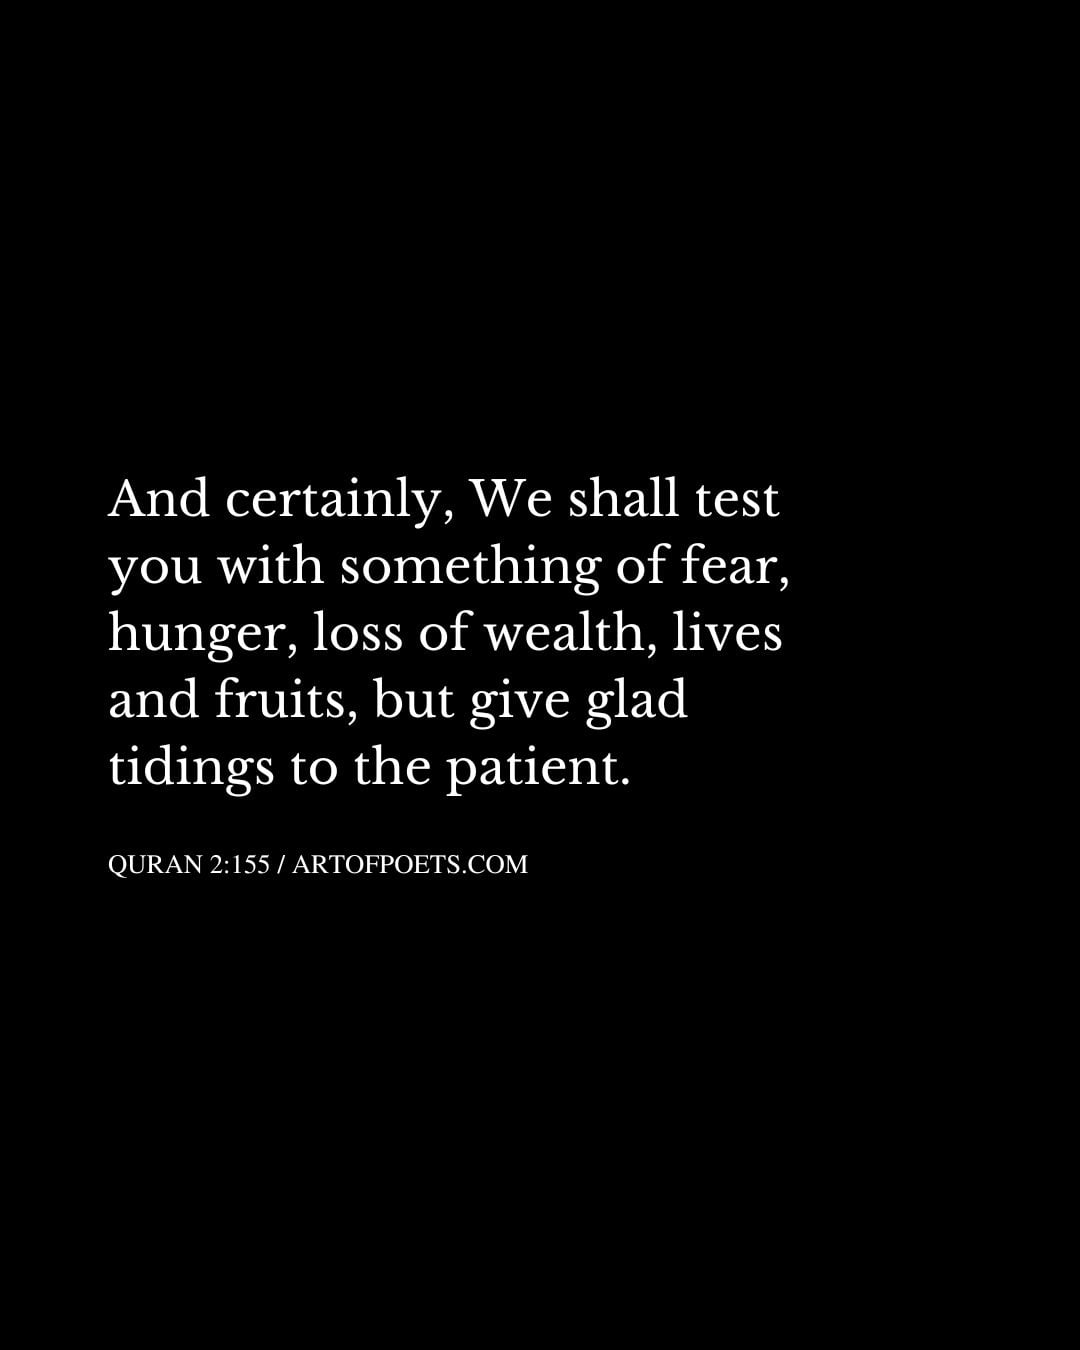 And certainly We shall test you with something of fear hunger loss of wealth lives and fruits but give glad tidings to the patient